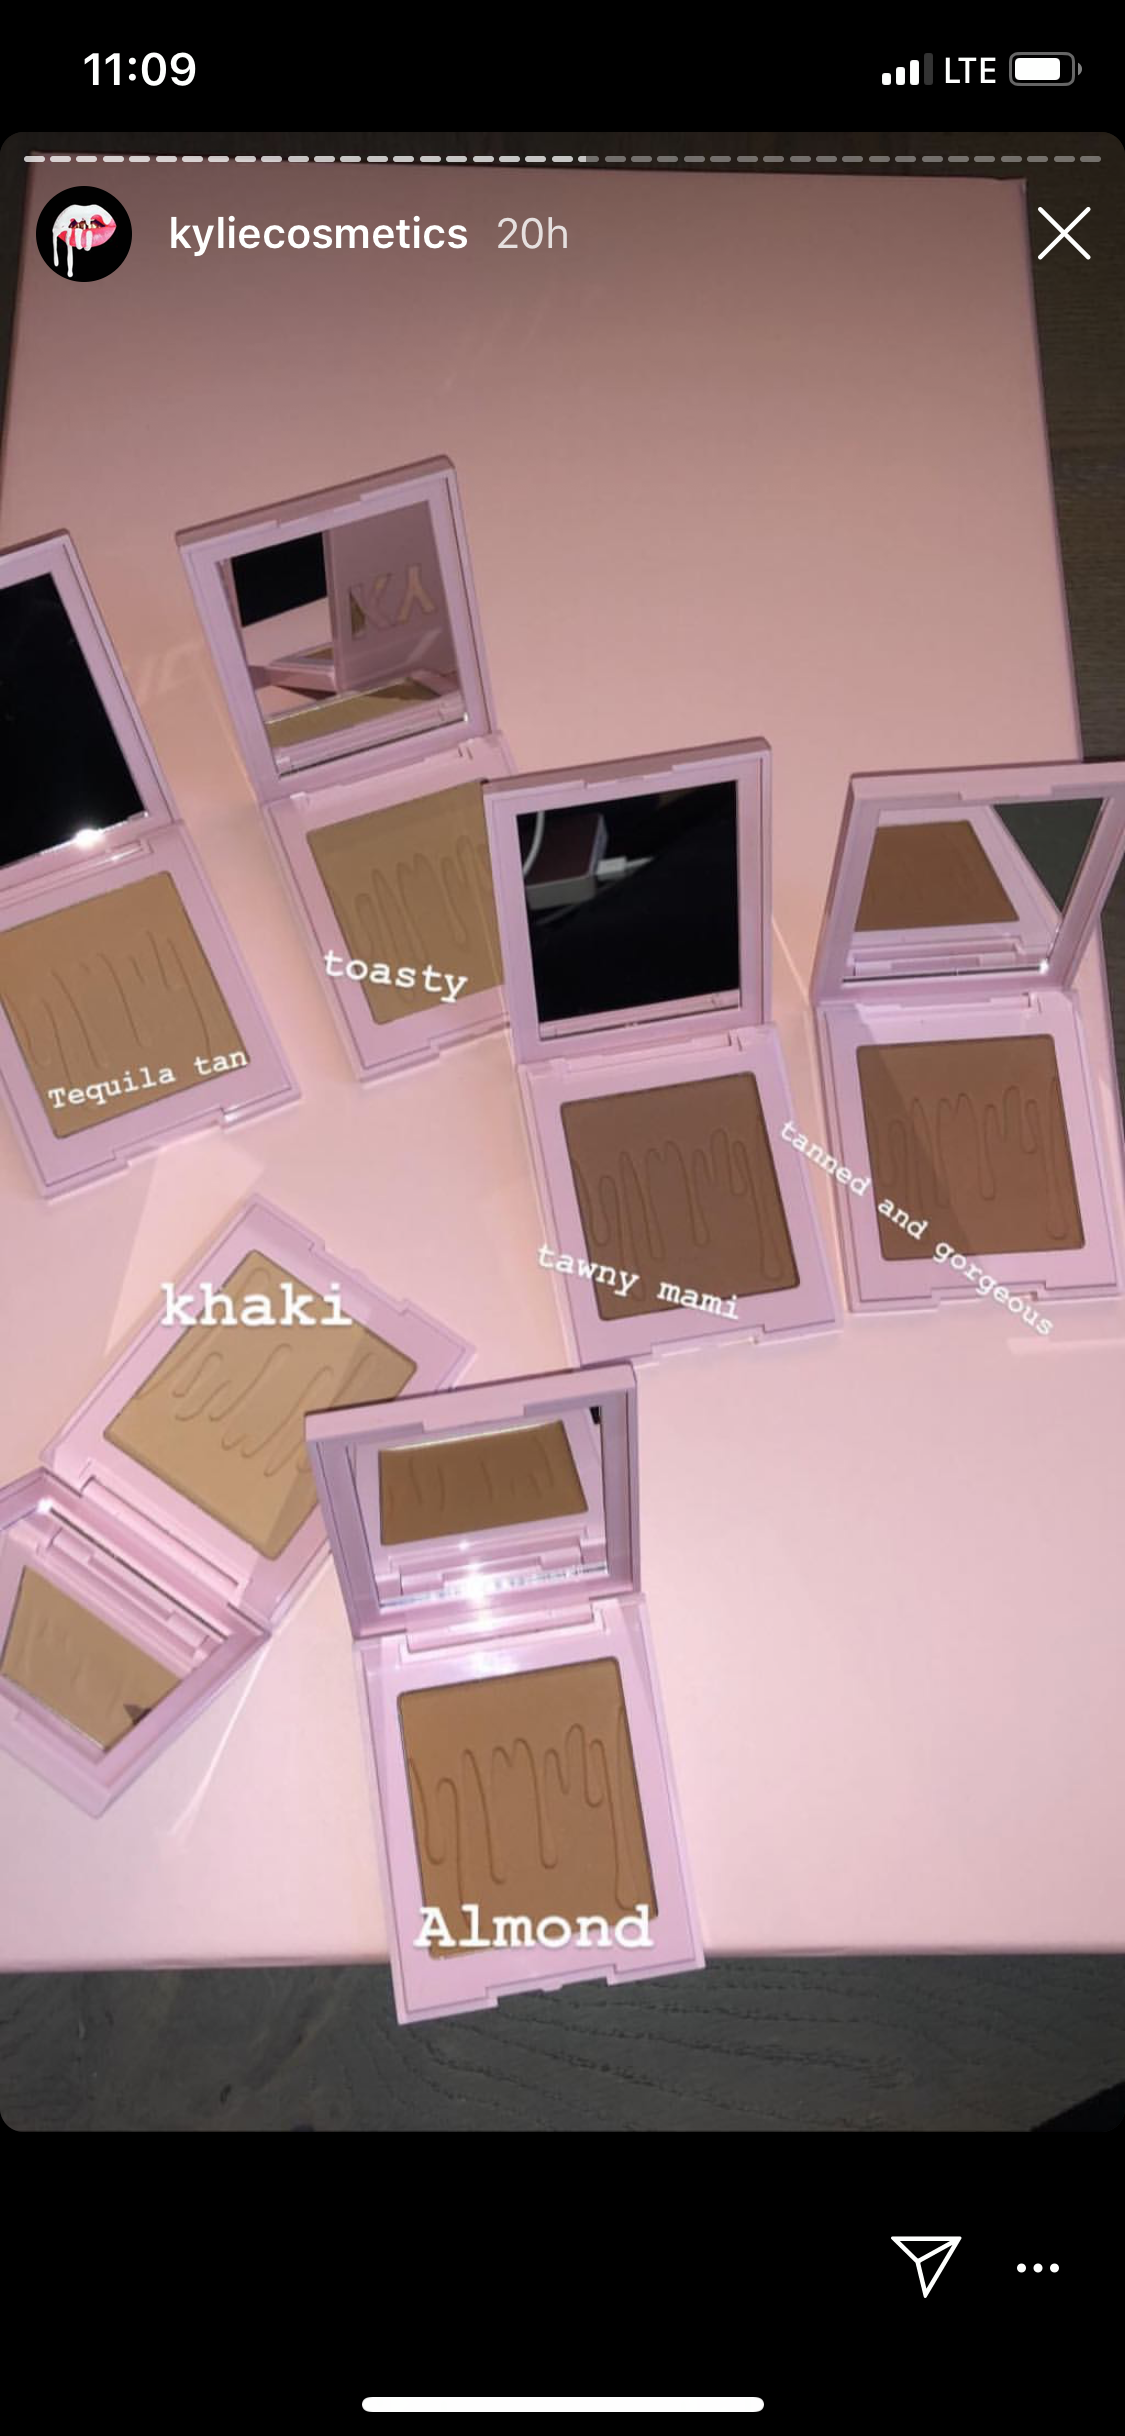 kylie-cosmetics-launches-bronzers.png